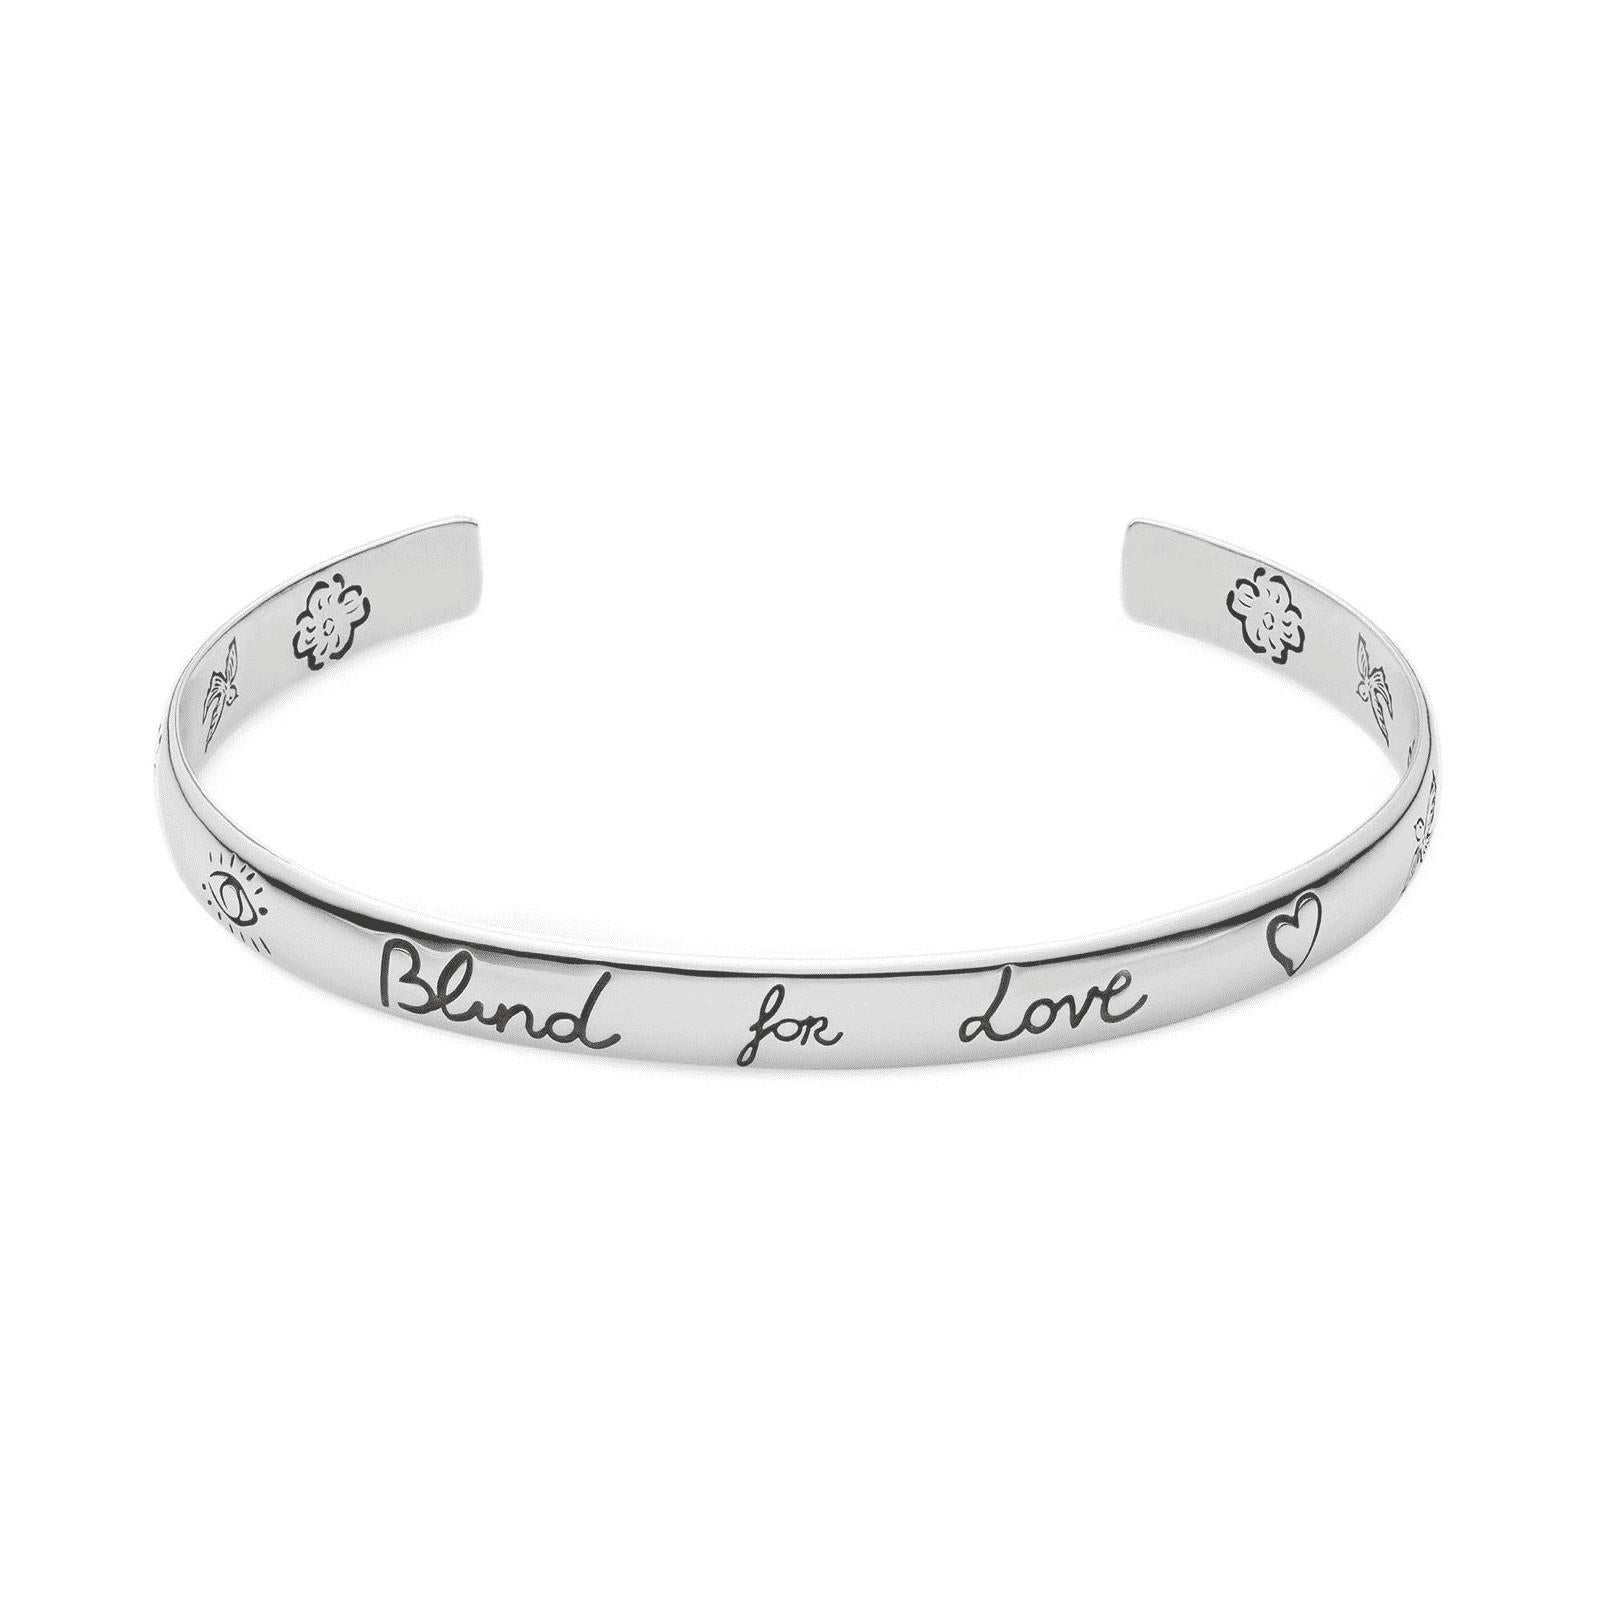 gucci blind for love bangle